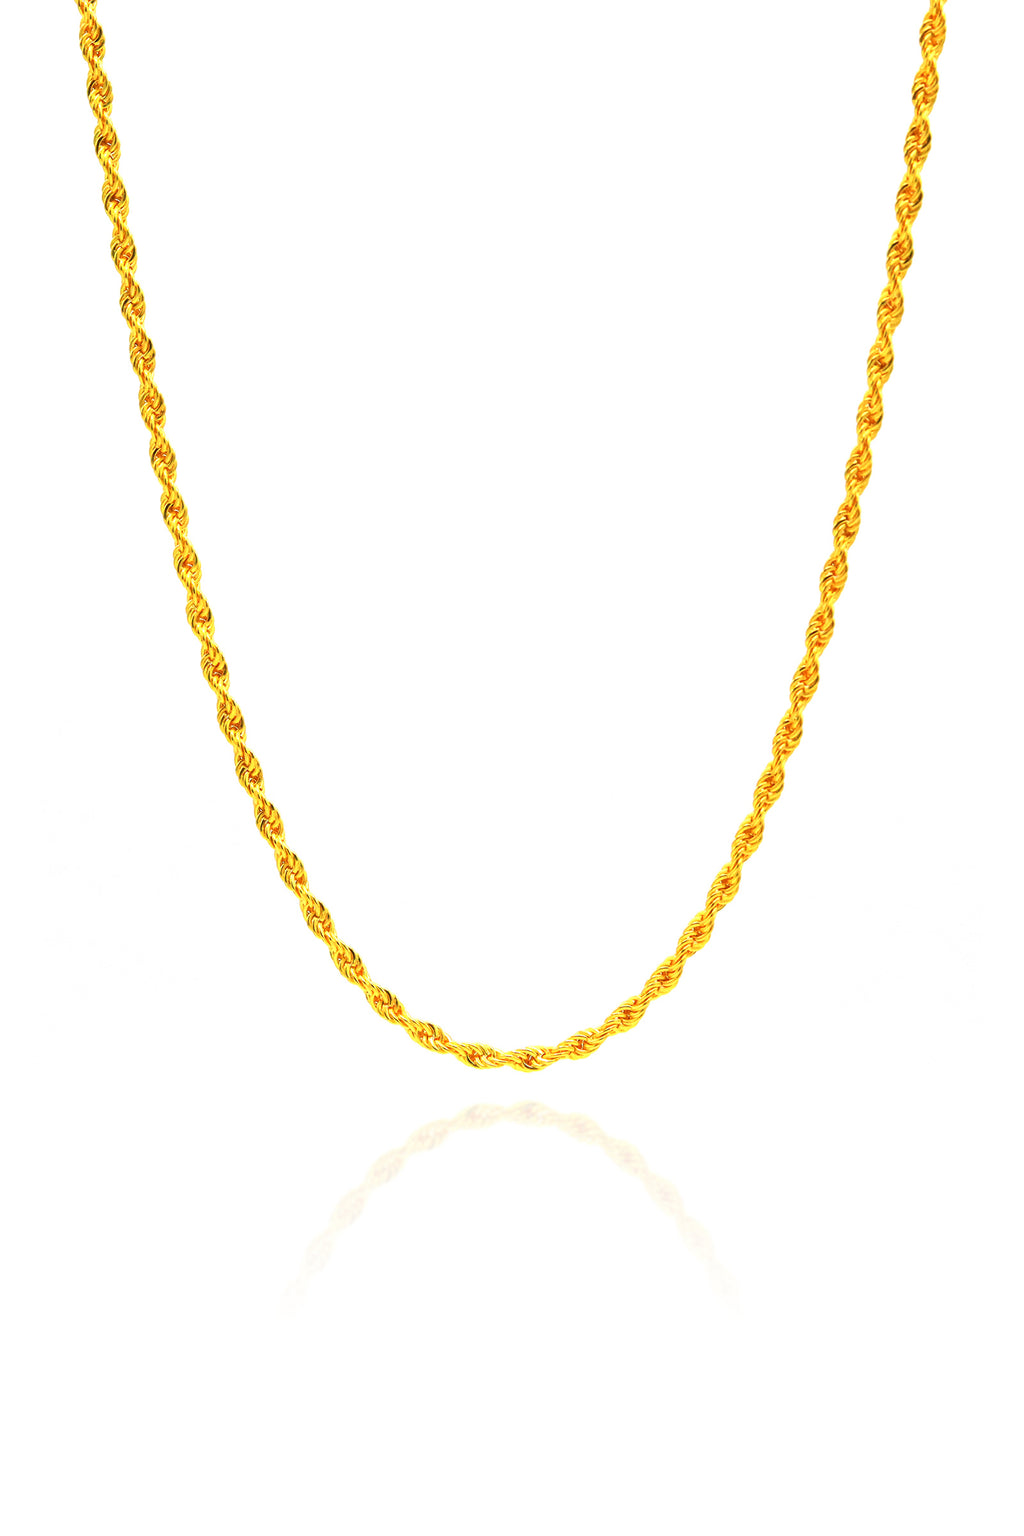 Gold Plated Auger Chain Silver Necklace (NG201019591)